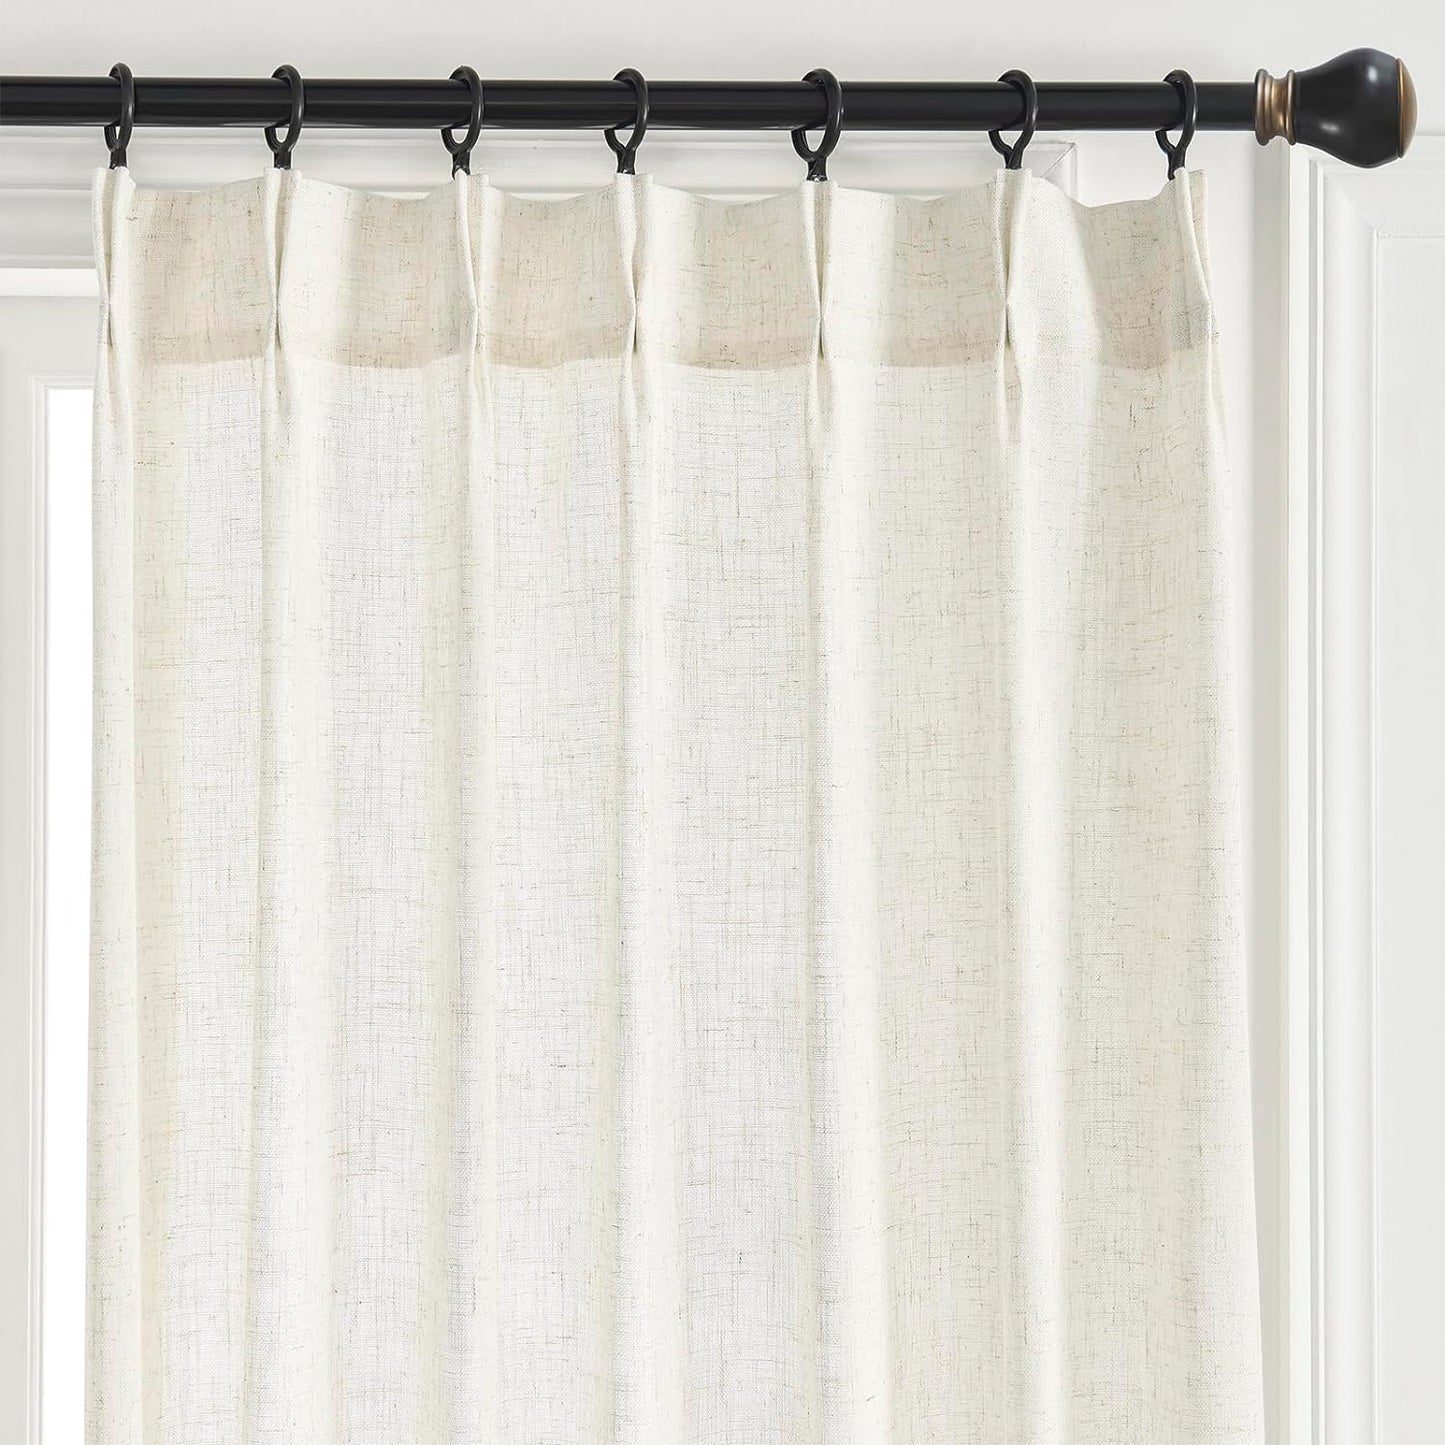 Maison Colette Pinch Pleat Natural Linen Sheer Curtain 95 Inches Long,Back Tab Stripe Transparent Voile Window Drapes for Bedroom/Living Room, 2 Panels,42" Width,Linen  Maison Colette Home Linen 42"W X 95"L 